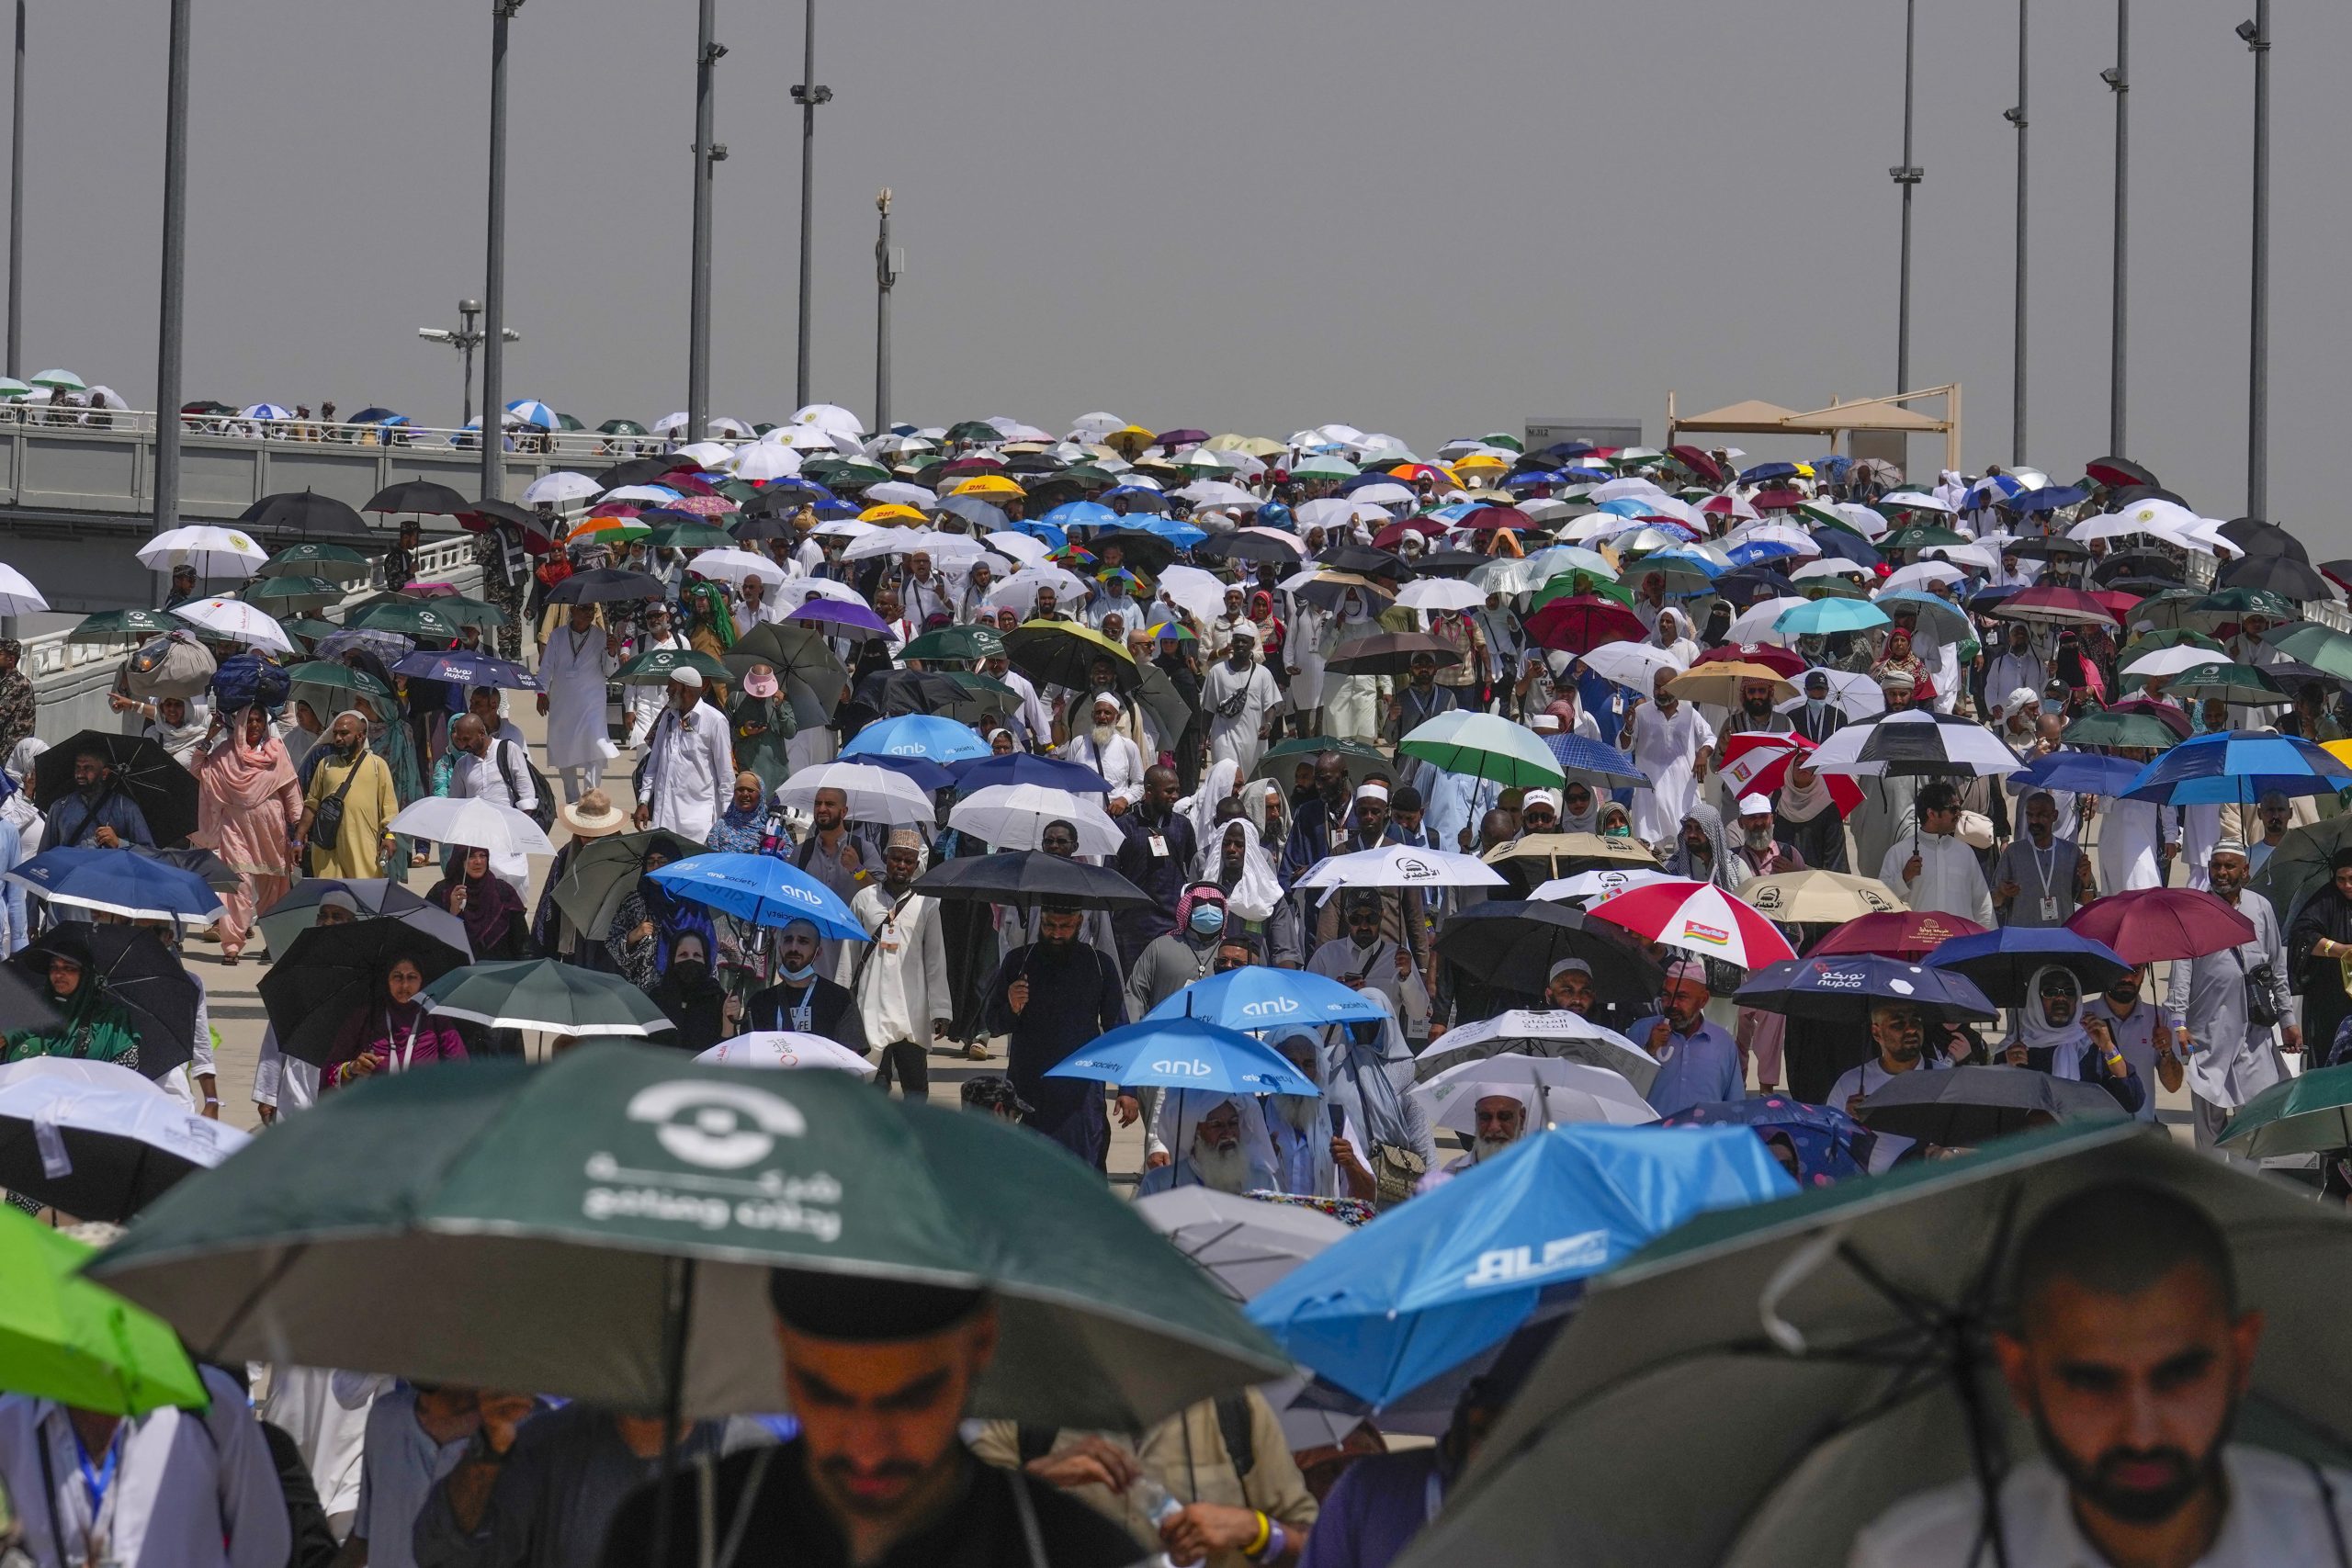 More than 1,300 people die during hajj, many after walking in scorching heat